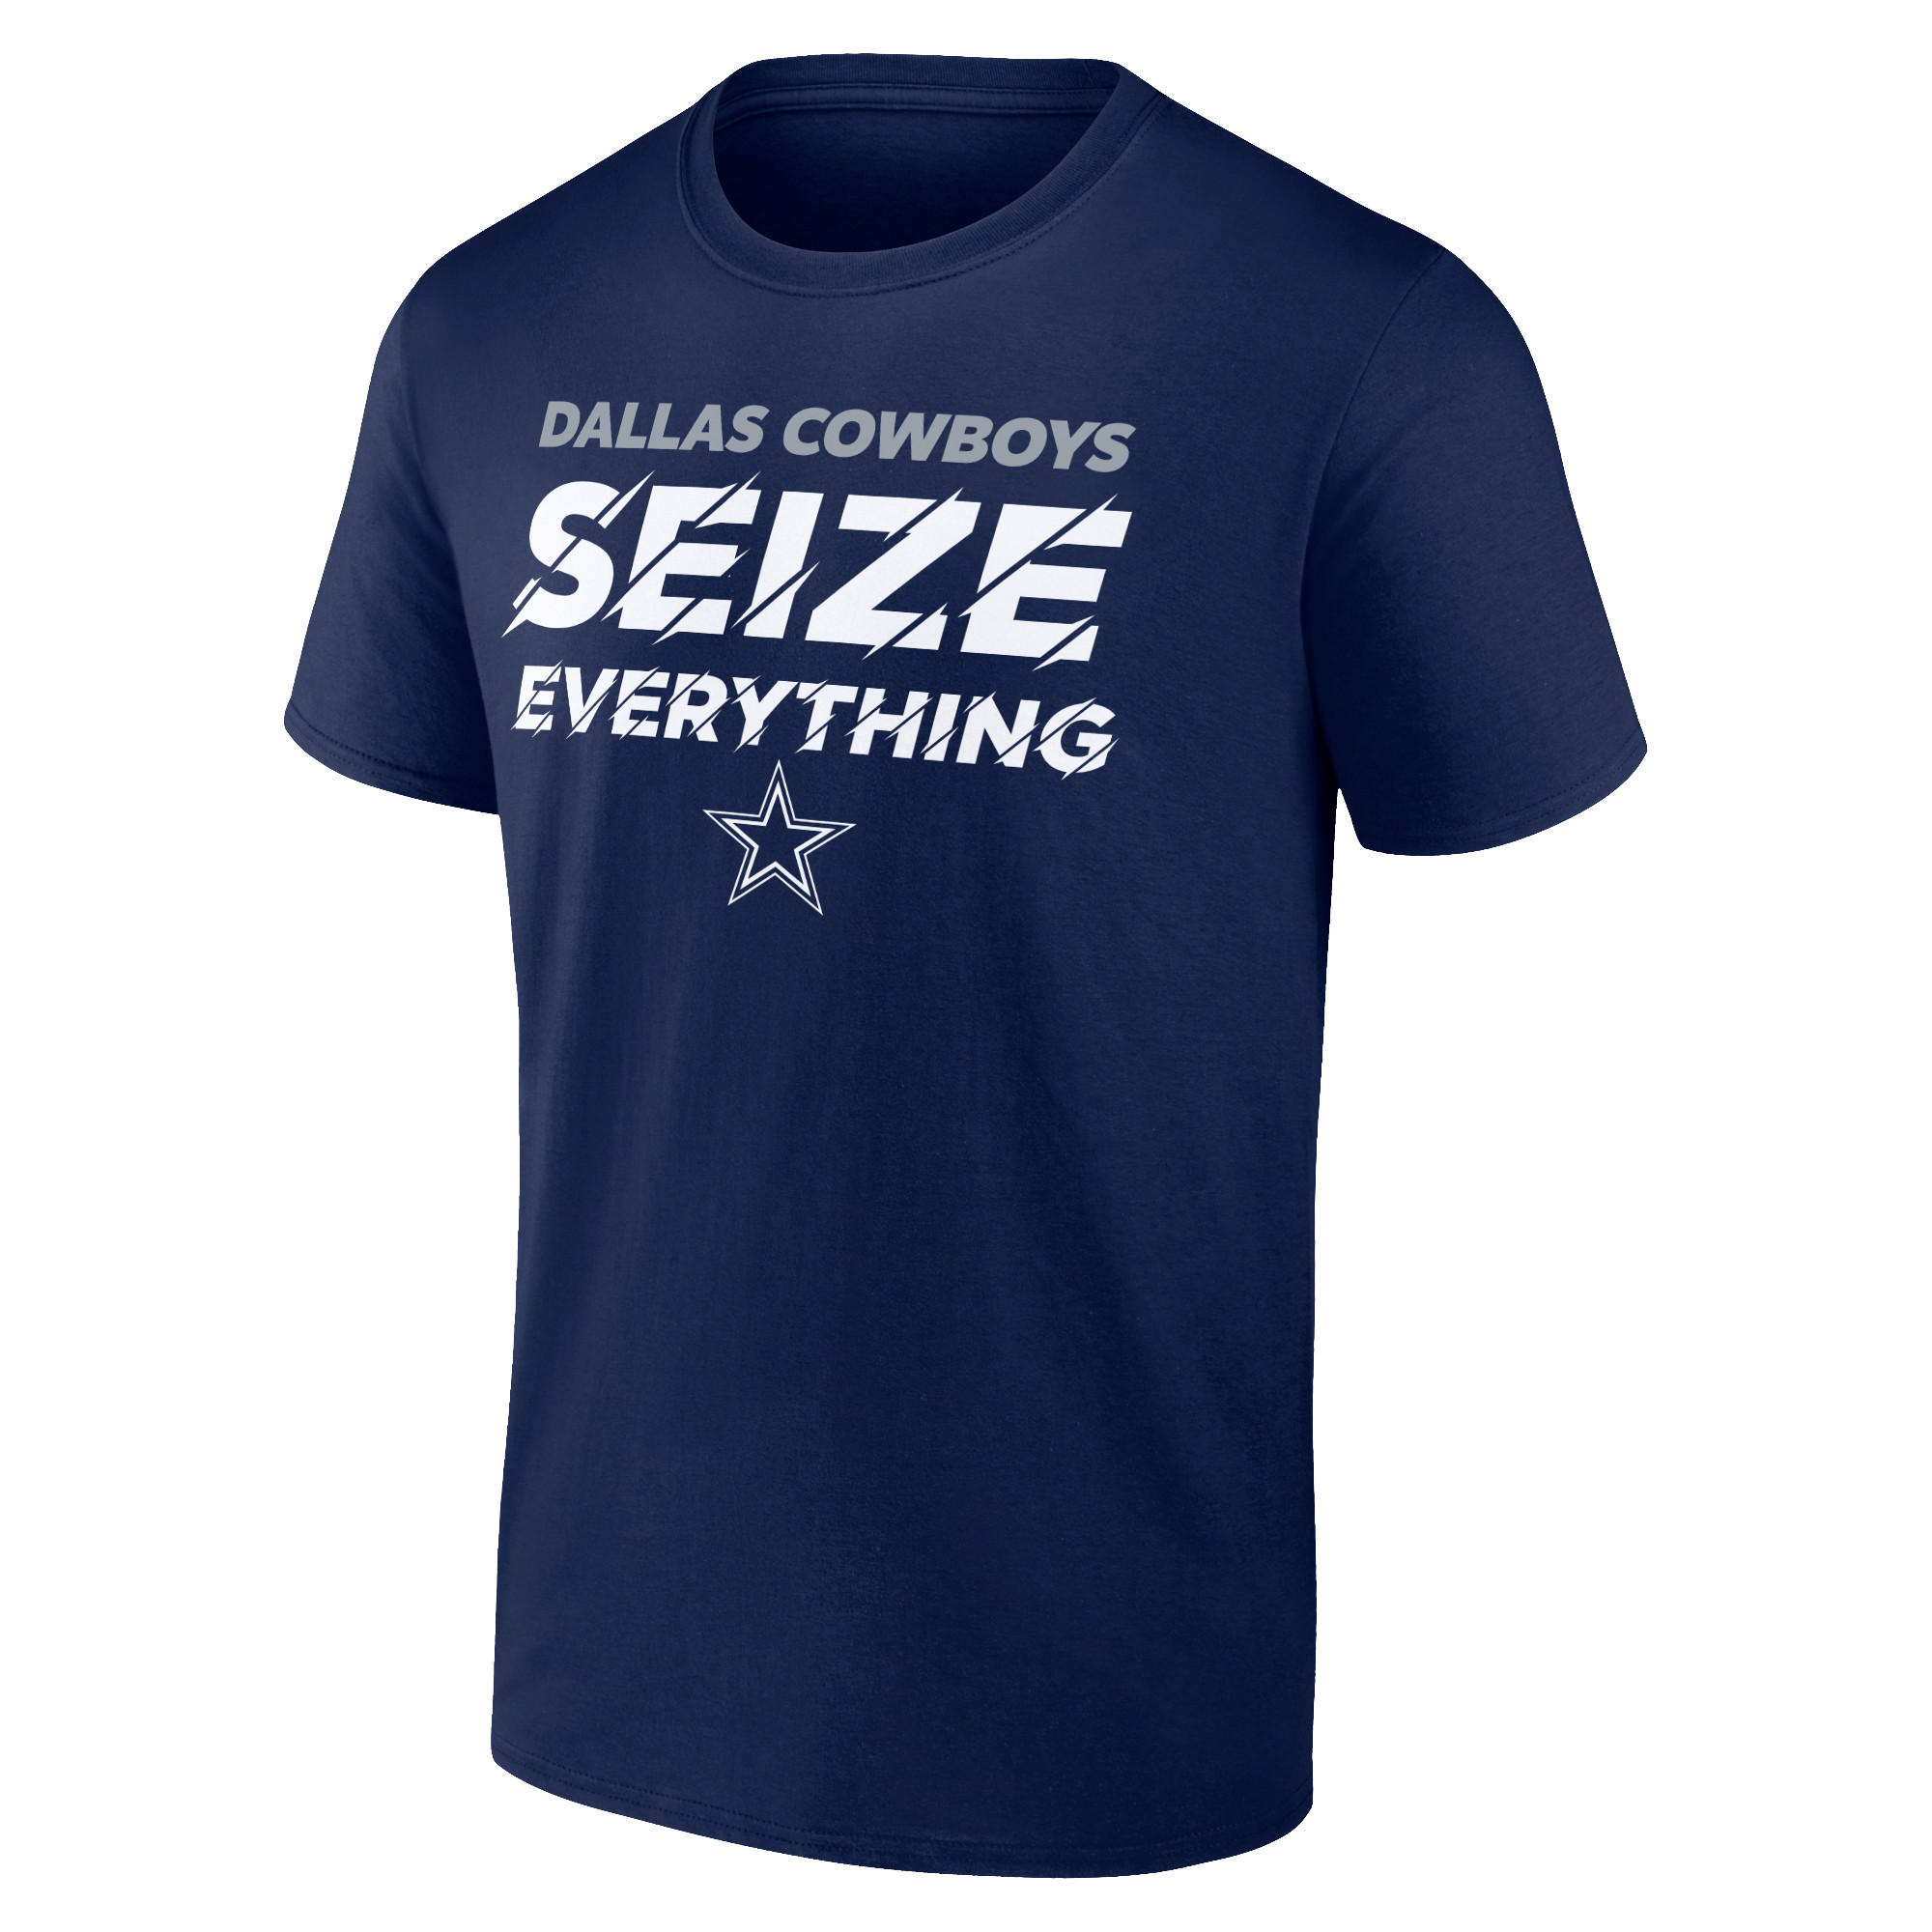 Men's Fanatics Branded  Navy Dallas Cowboys Seize Everything T-Shirt - image 2 of 3